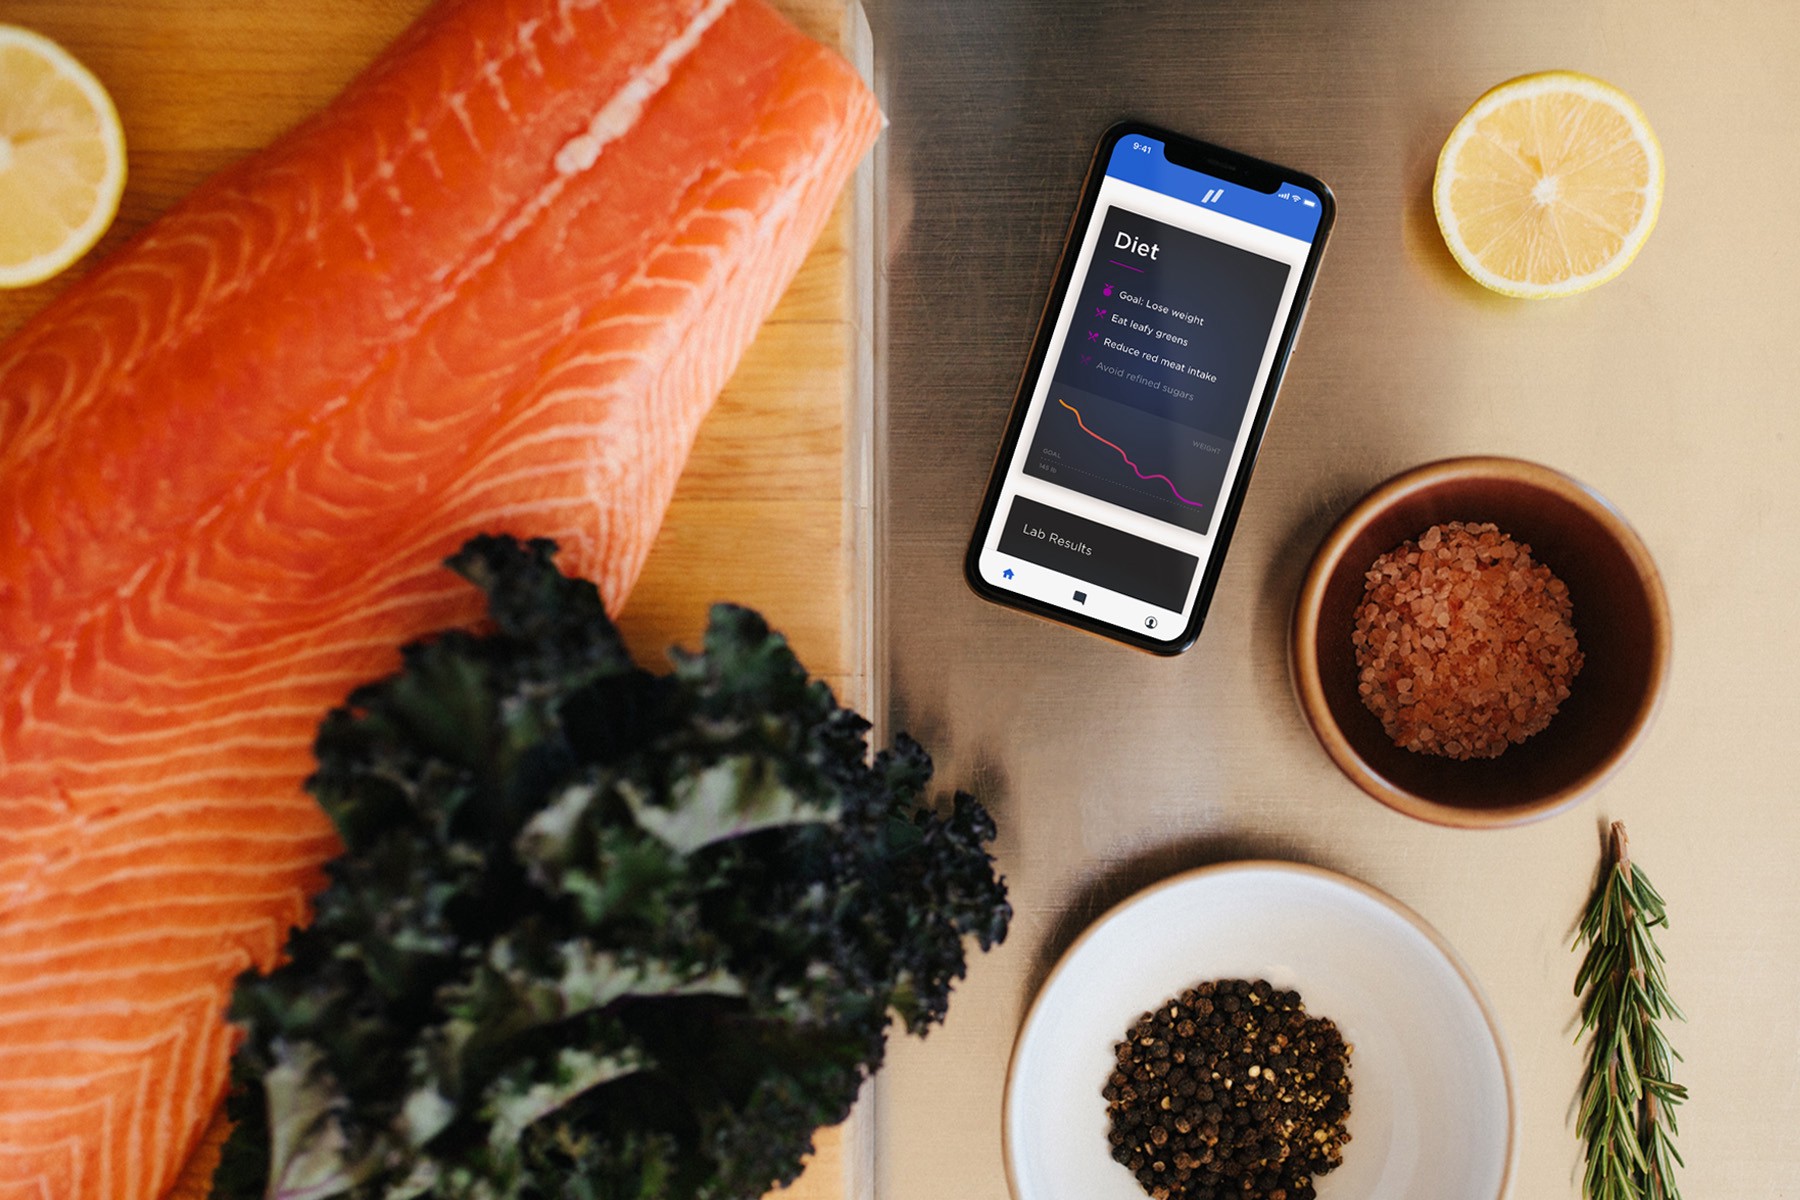 raw salmon and leafy green sit on table next to a phone with diet on screen